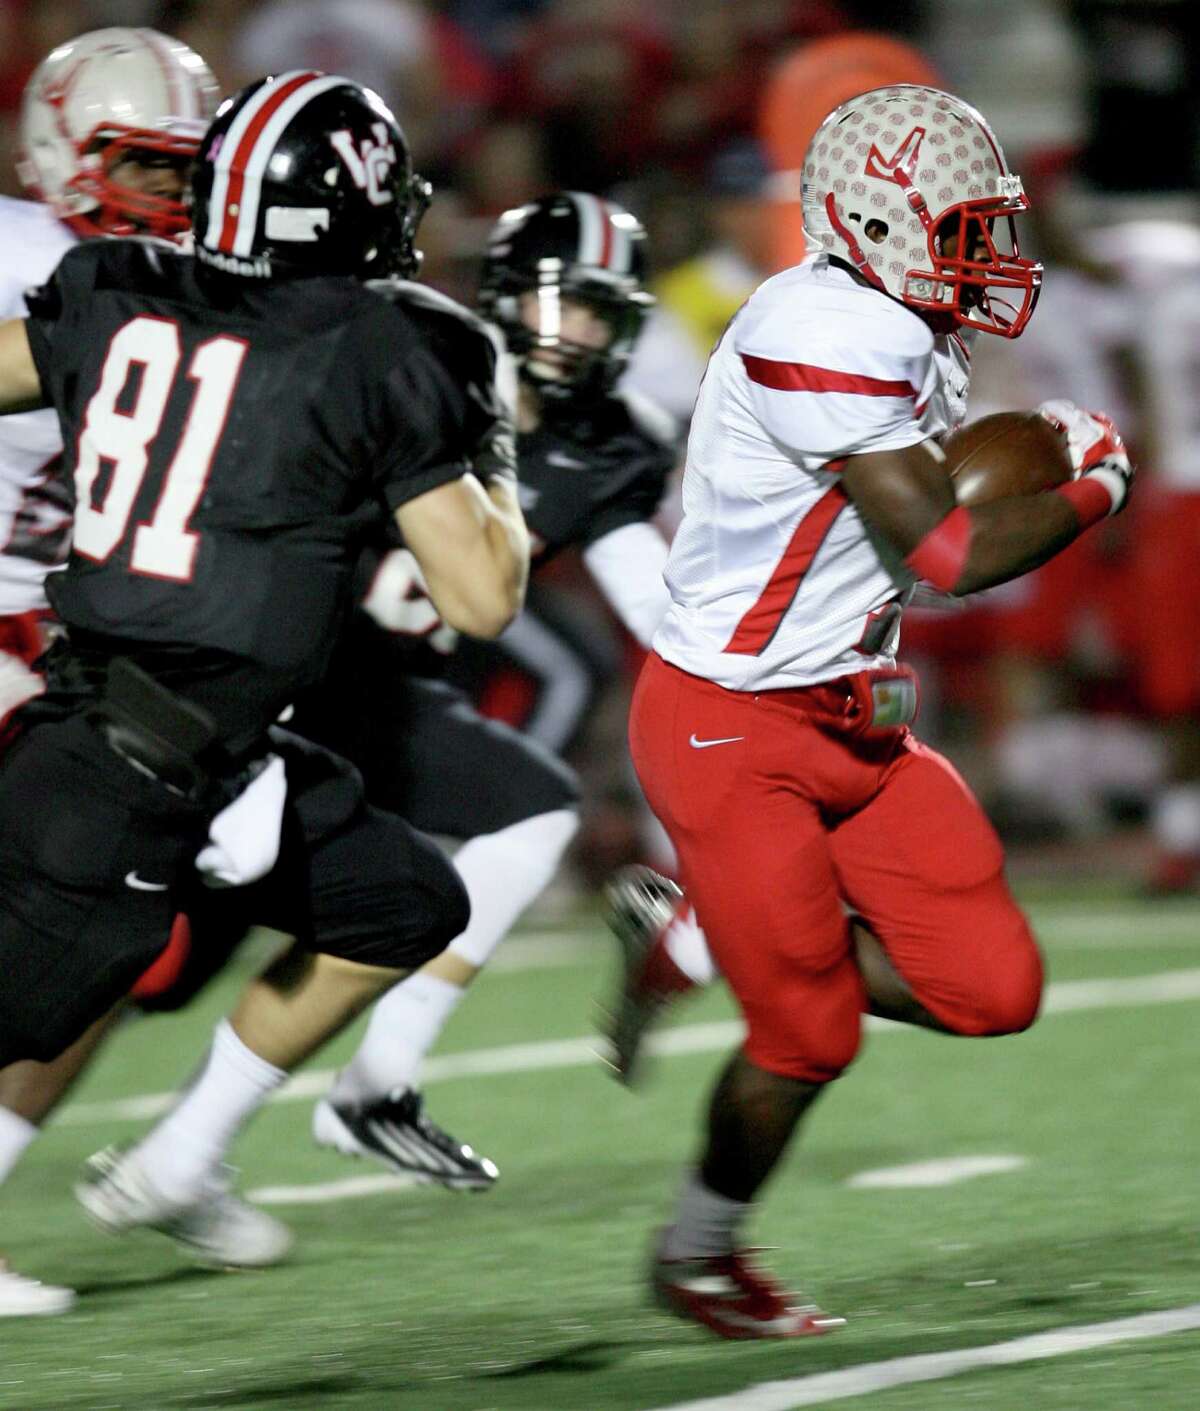 Judson High School running back Jo'von Kyle outruns Churchill defenders Nov. 15, 2013 to make the second touchdown of the game for Judson at Comalander Stadium.